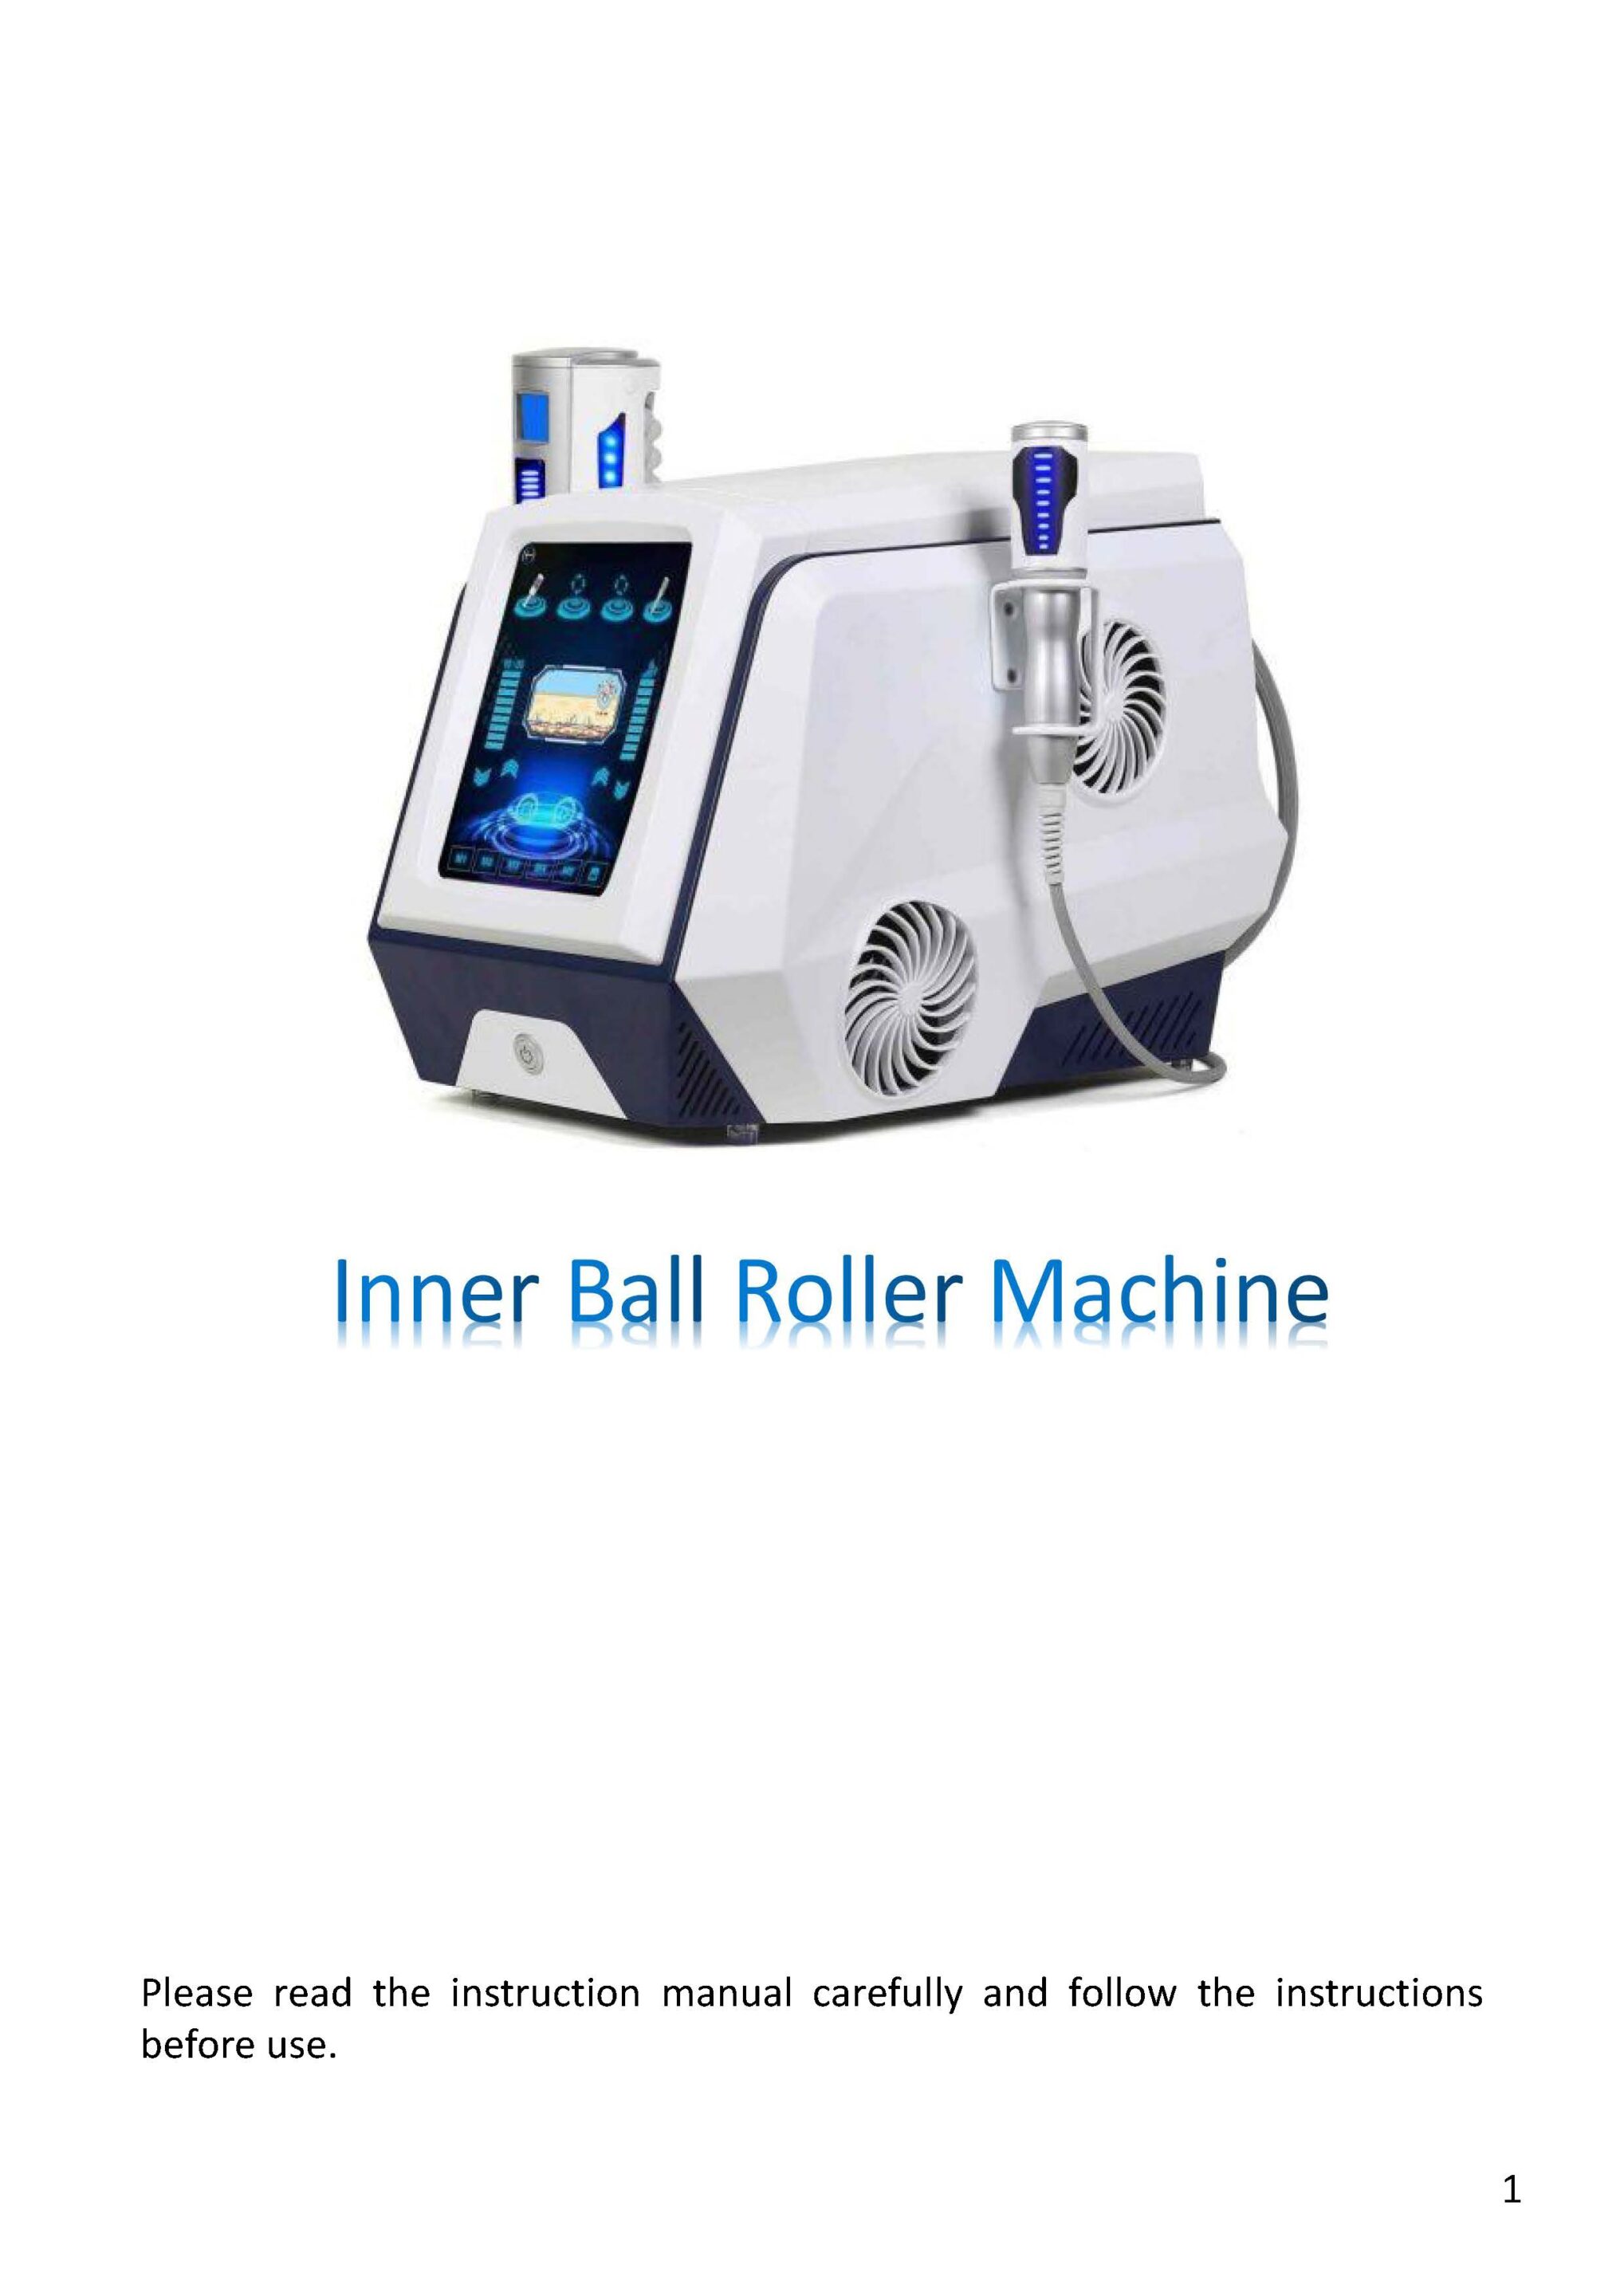 Portable Inner Ball Roller Machine with Intelligent Handles